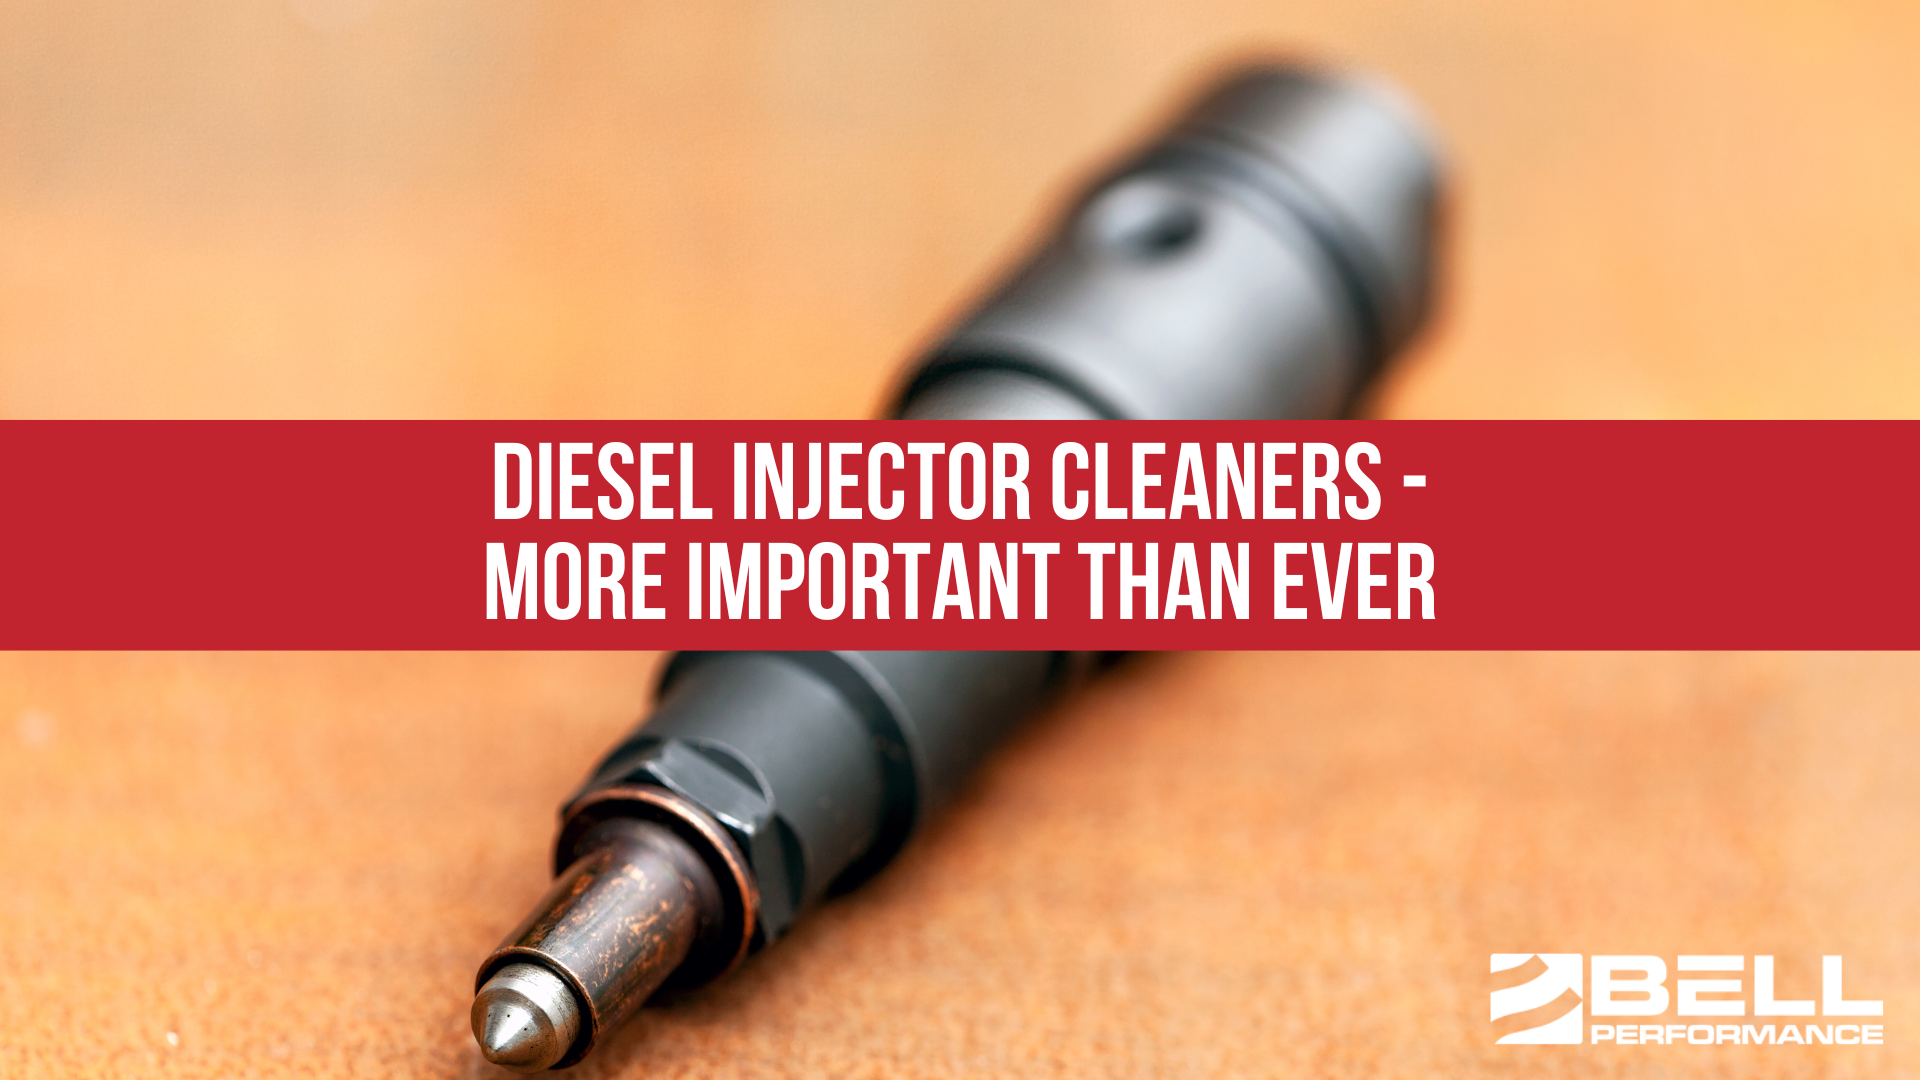 Diesel Injector Cleaners - More Important Than Ever